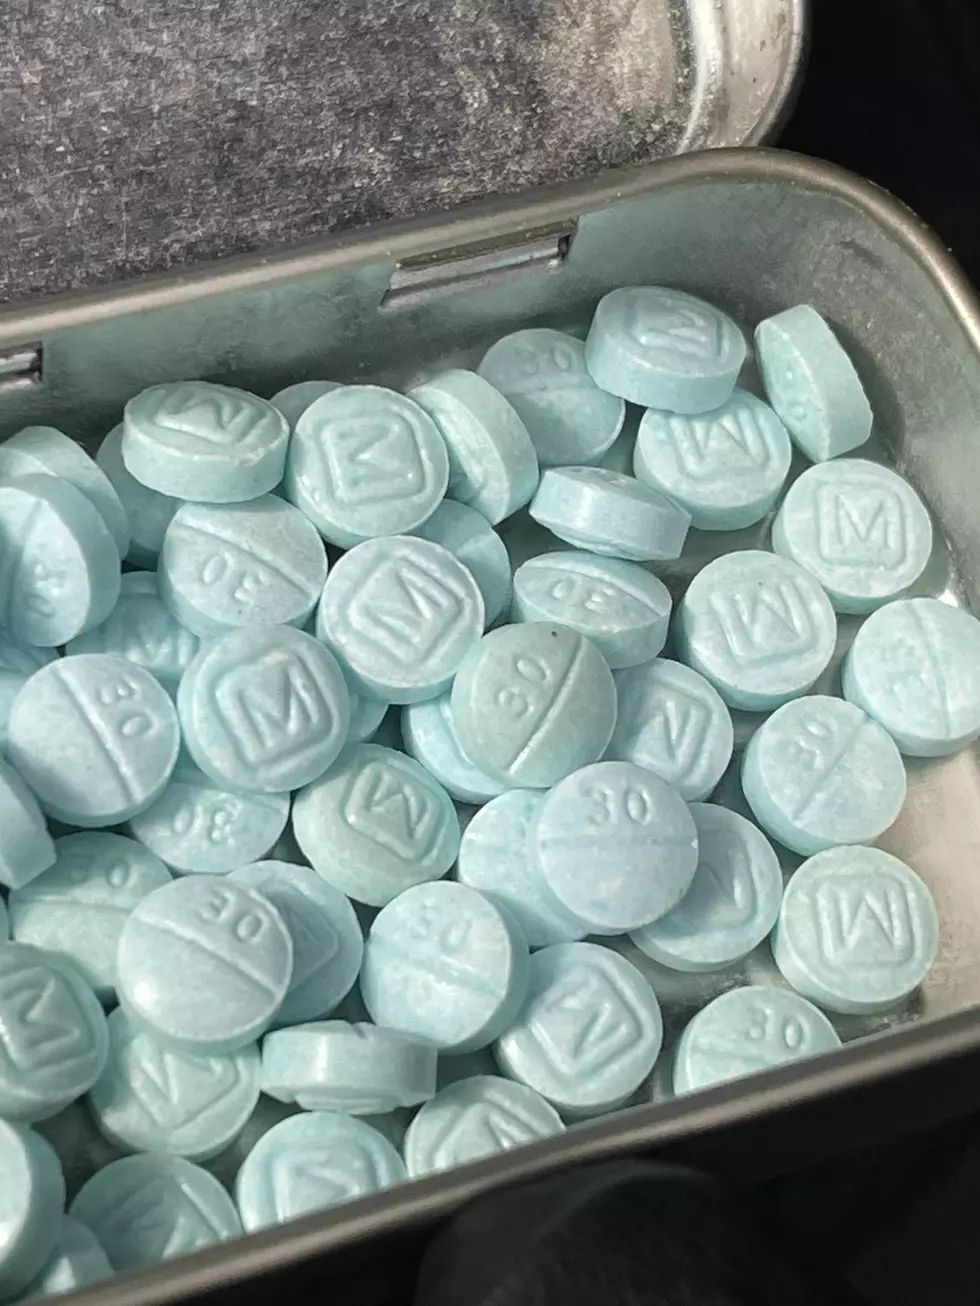 Brewster Schools Warn About Fentanyl Disguised As Candy, Mints